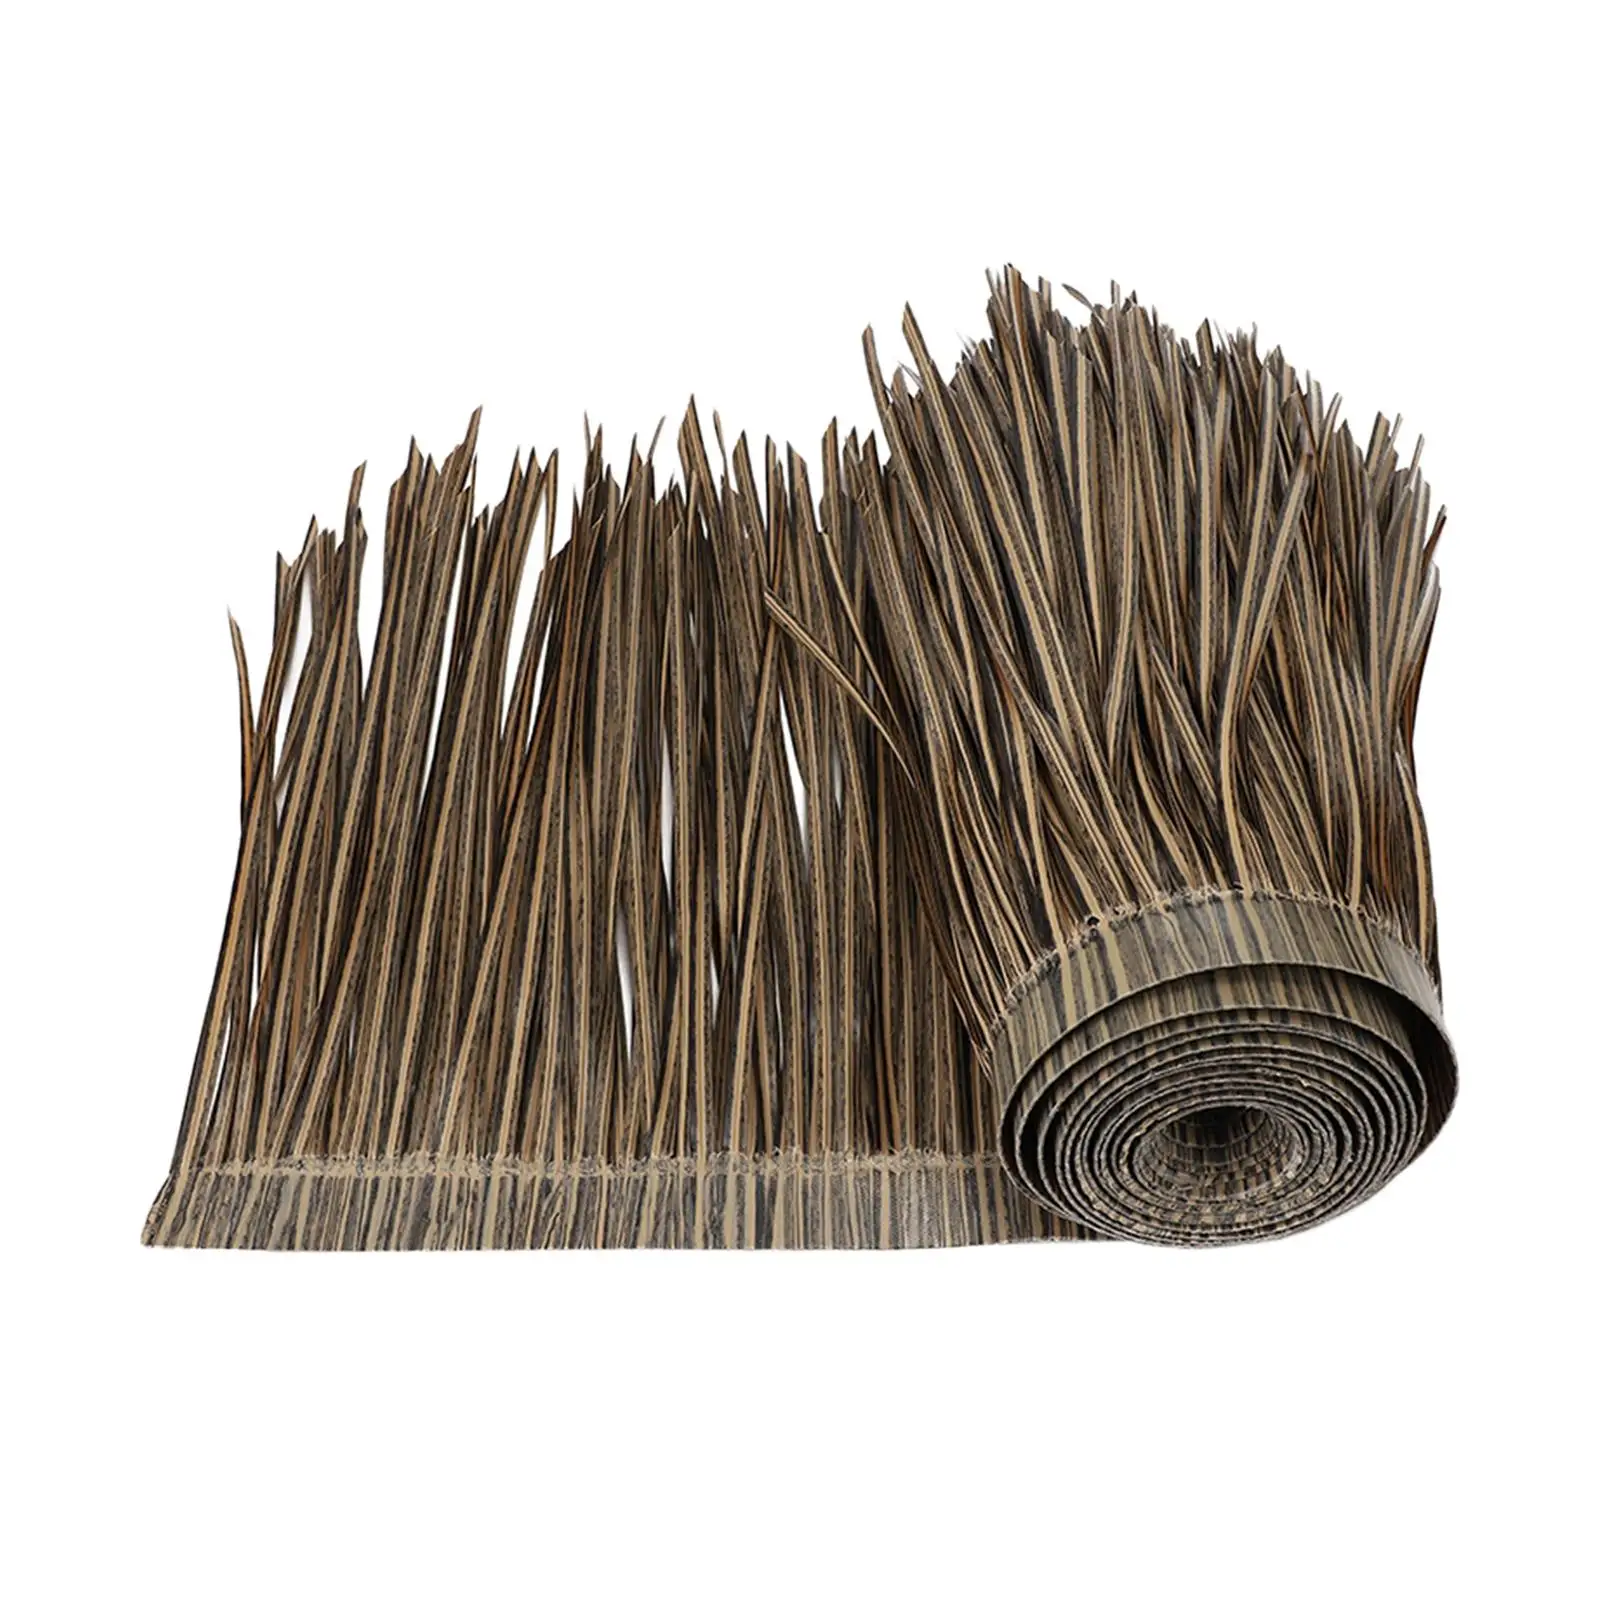 Straw Roof Thatch Simulation Accs Grass Skirting Roof for Hut Bar Patio